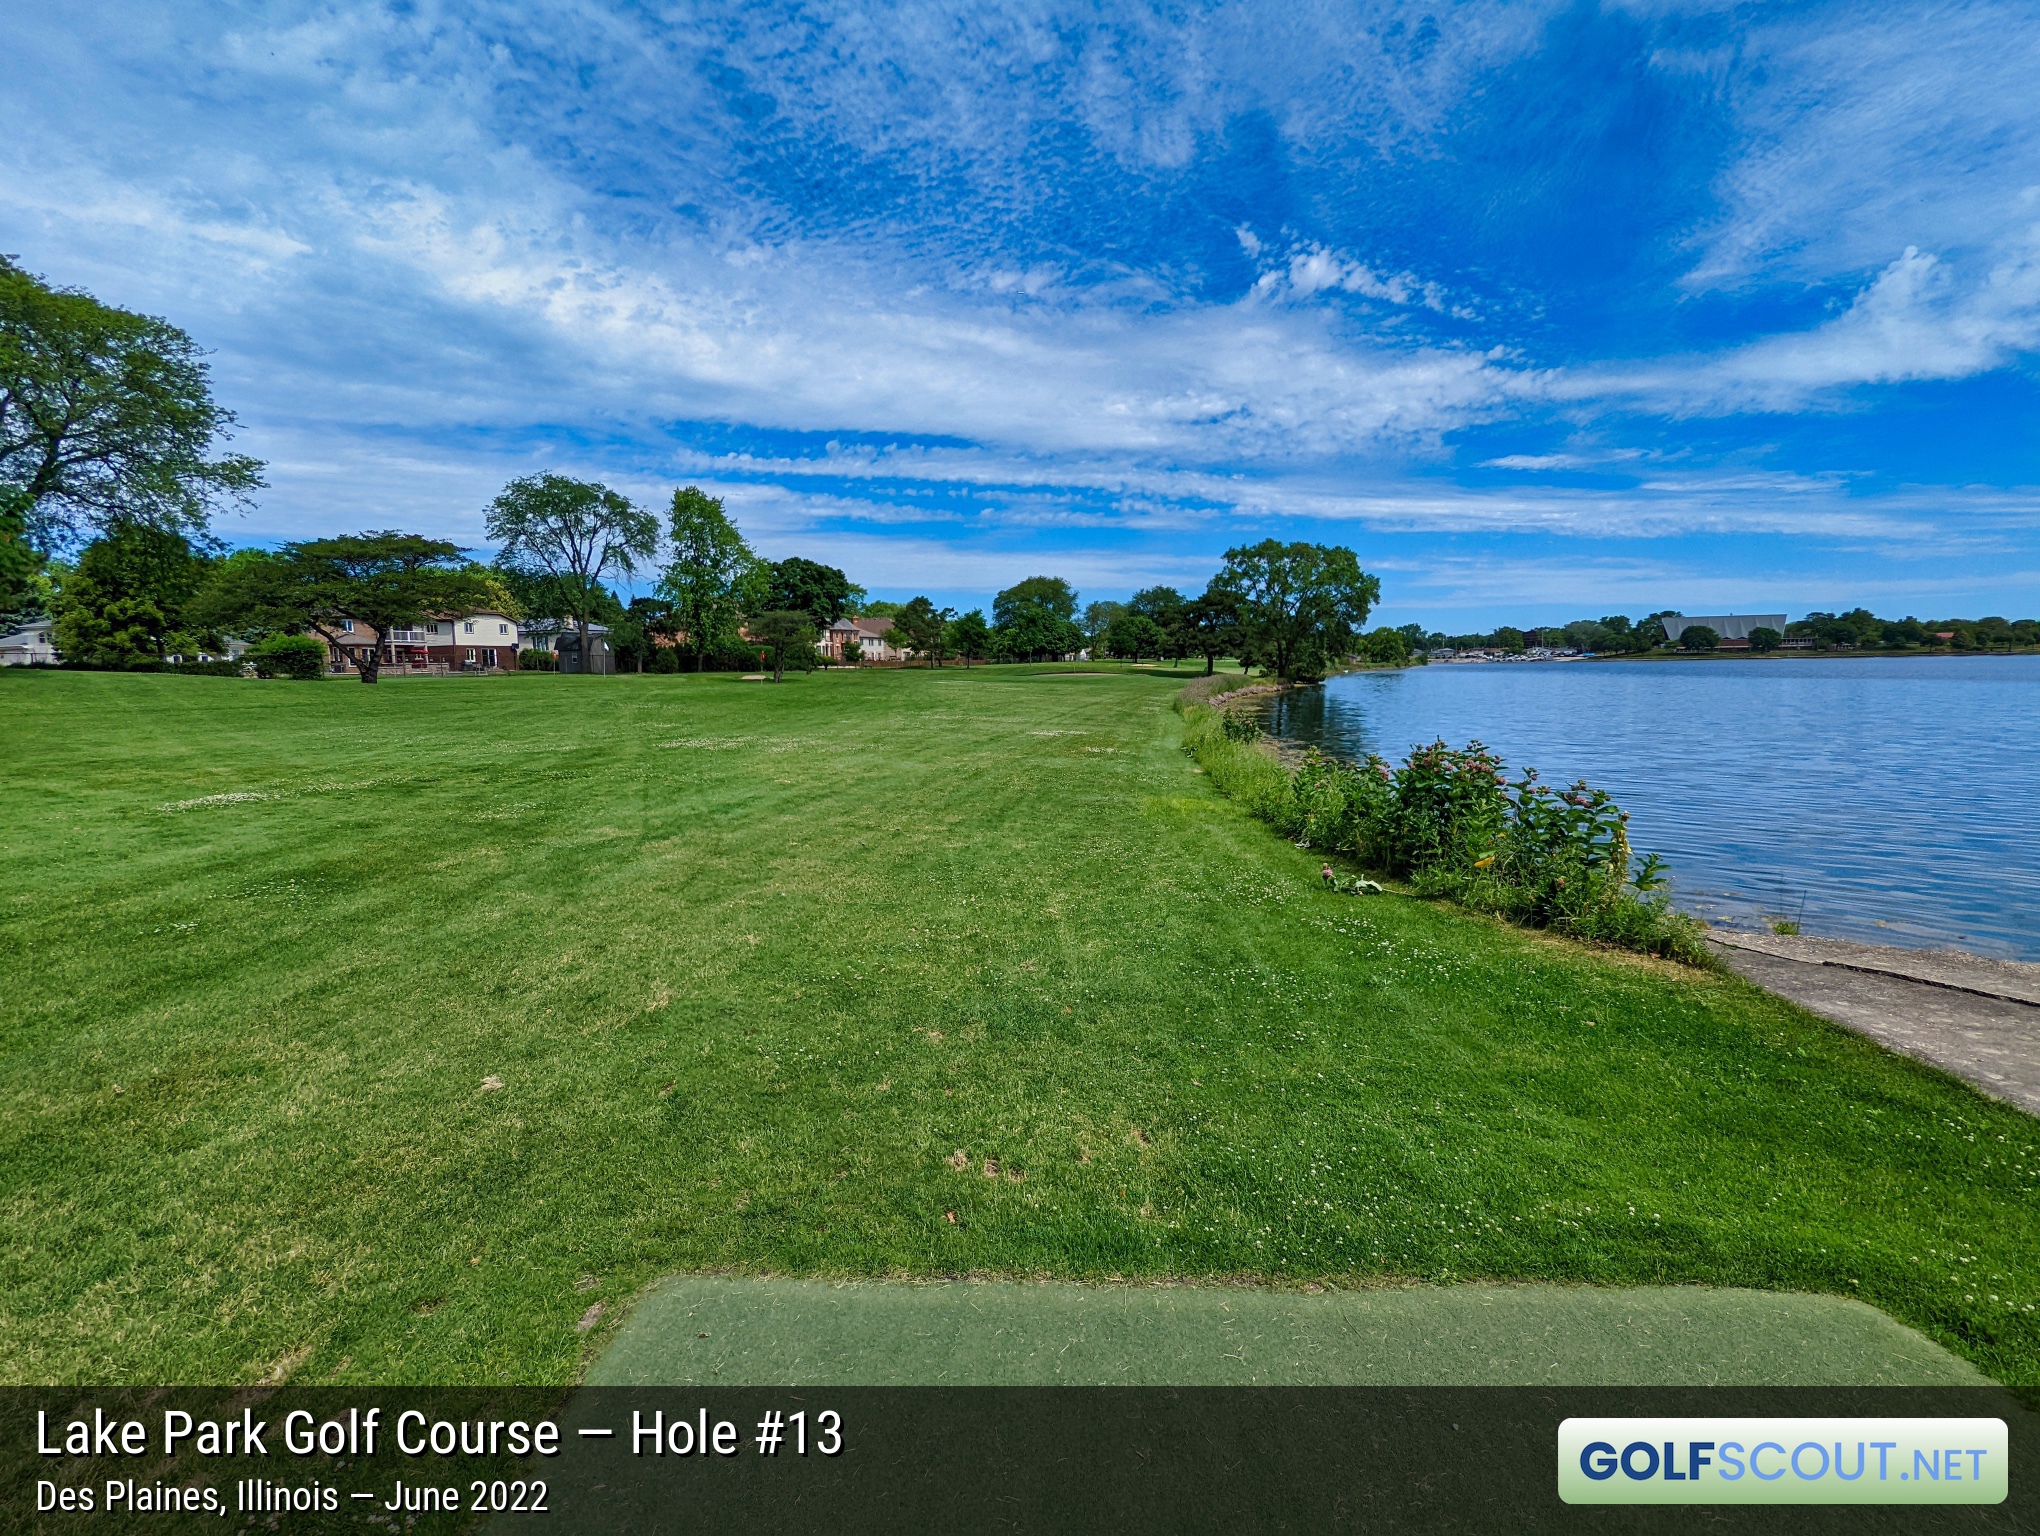 Photo of hole #13 at Lake Park Golf Course in Des Plaines, Illinois. 